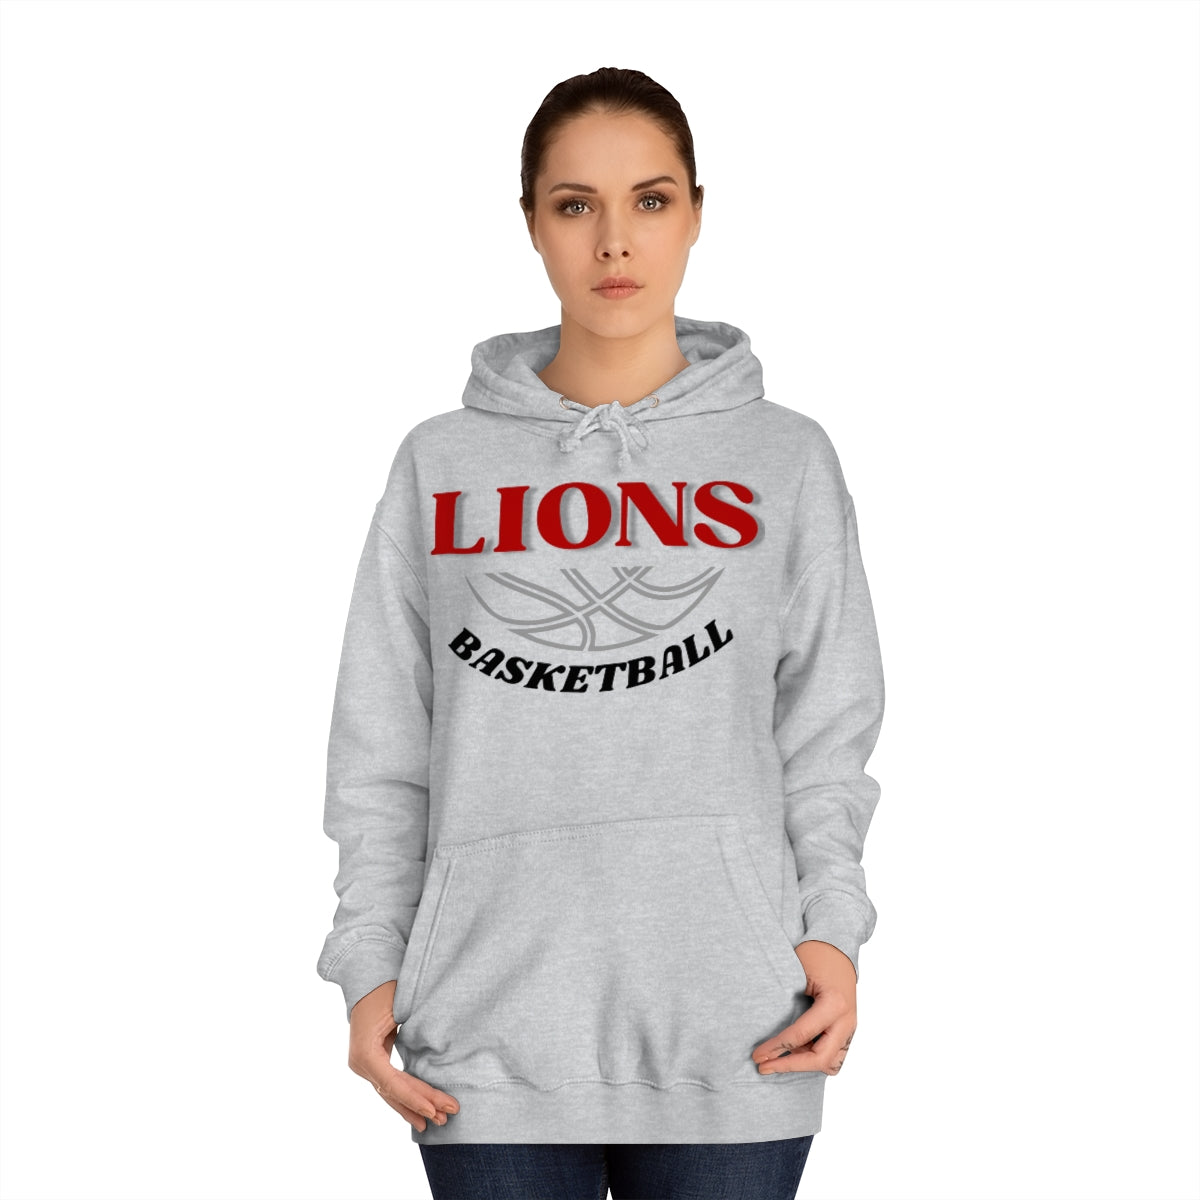 Lions Unisex College Basketball  Hoodie